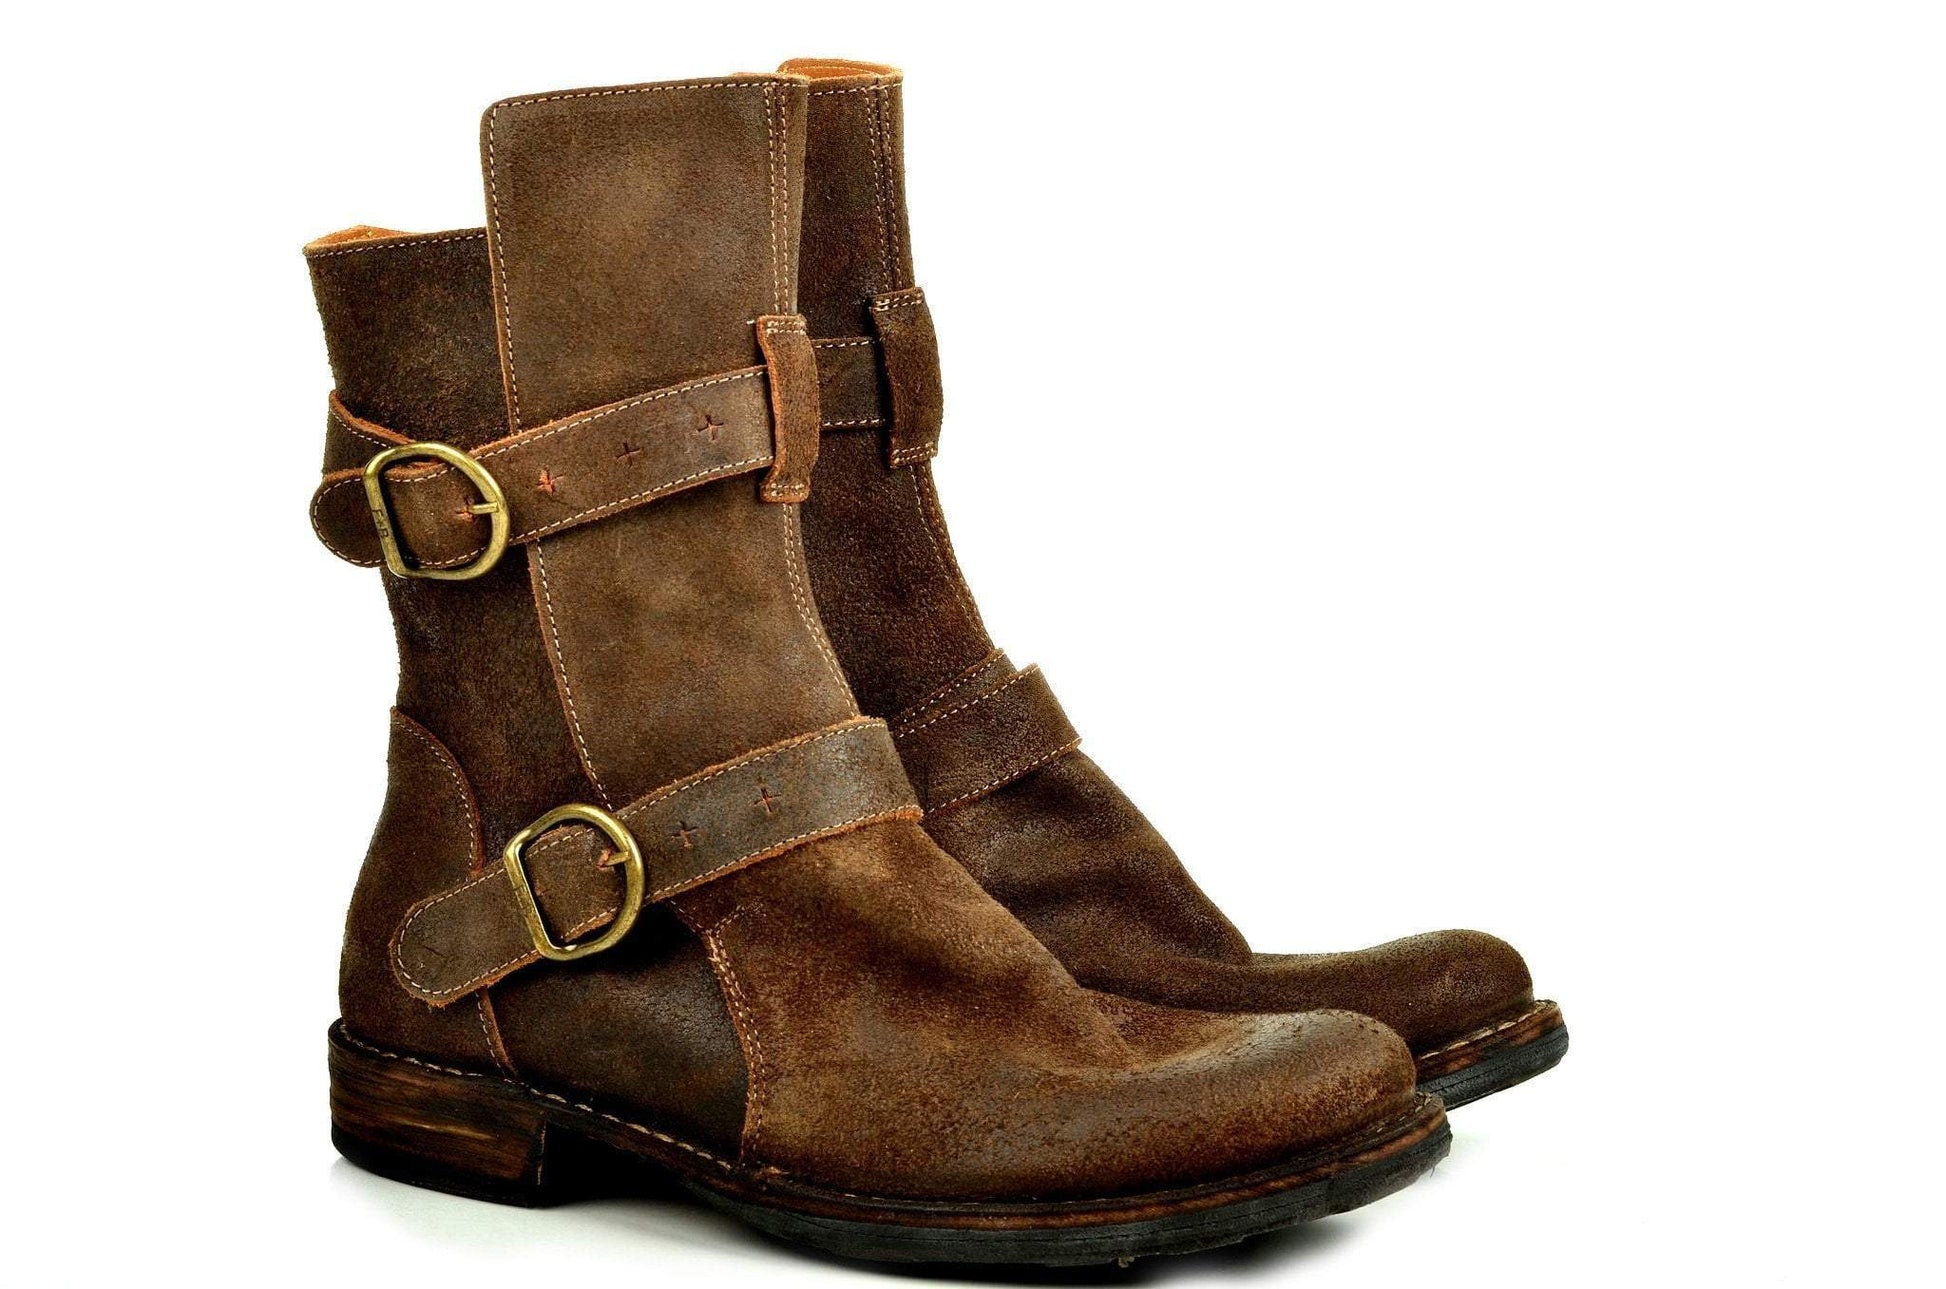 Bootland Boots Brown Rain and Mud Leather Boots A778782